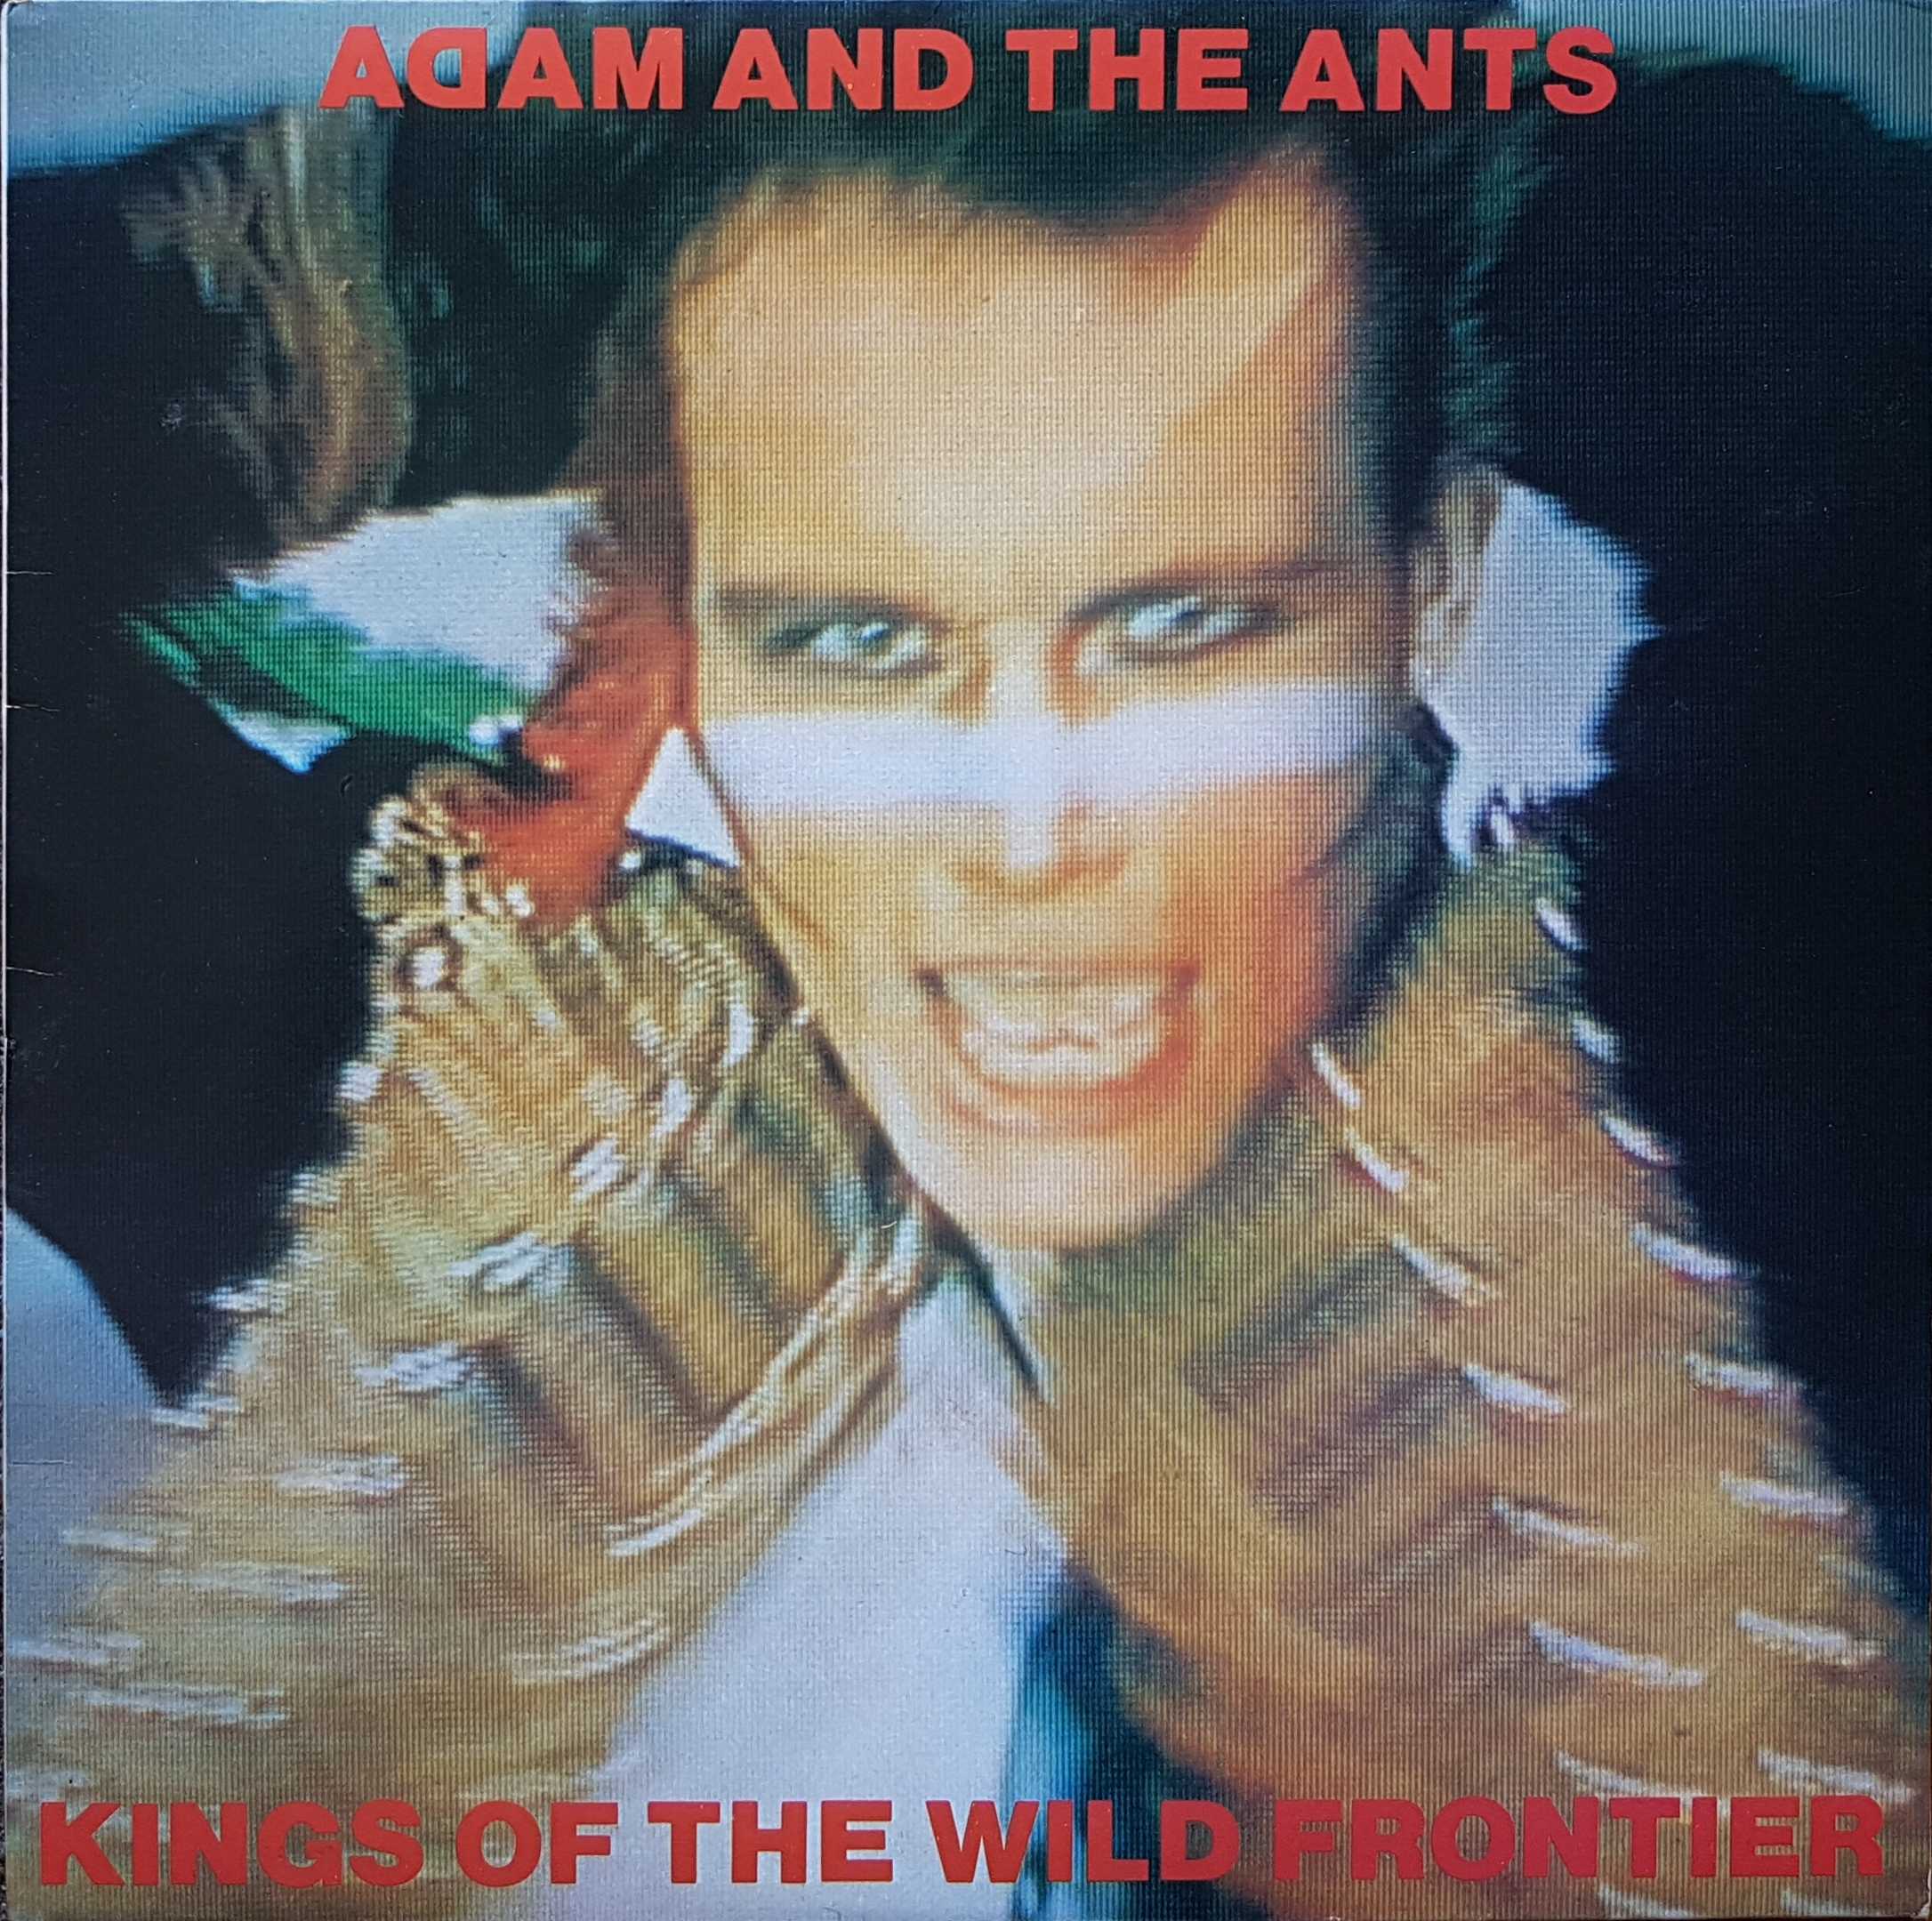 Picture of CBS 84549 Kings of the wild frontier by artist Adam and the Ants 